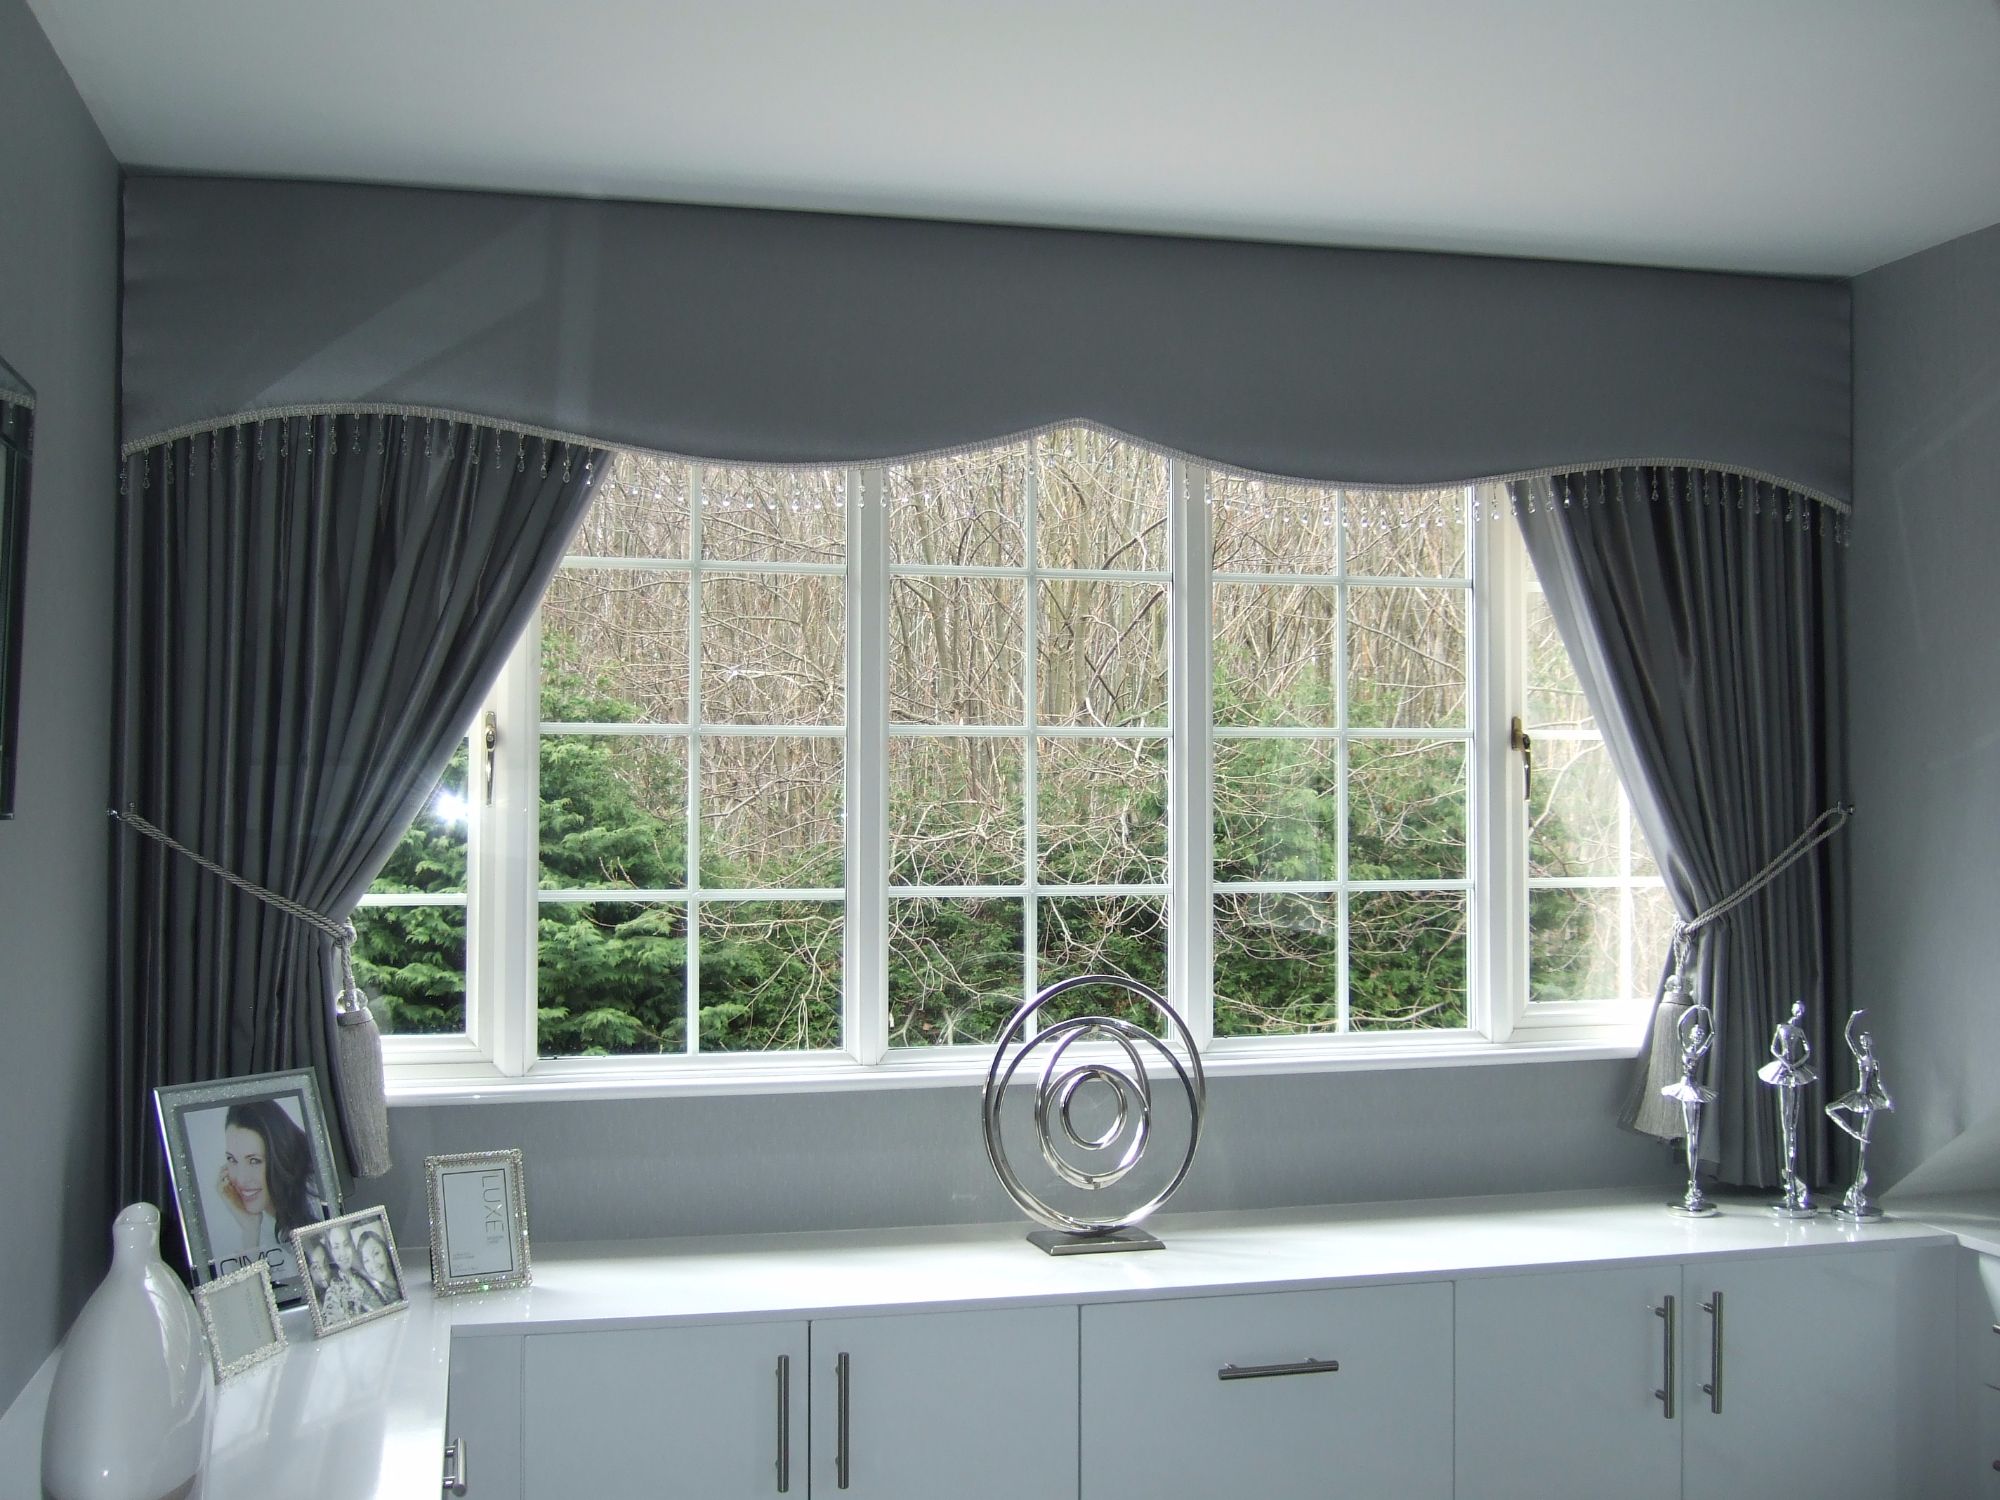 Shaped satin pelmet and curtains with crystal trim